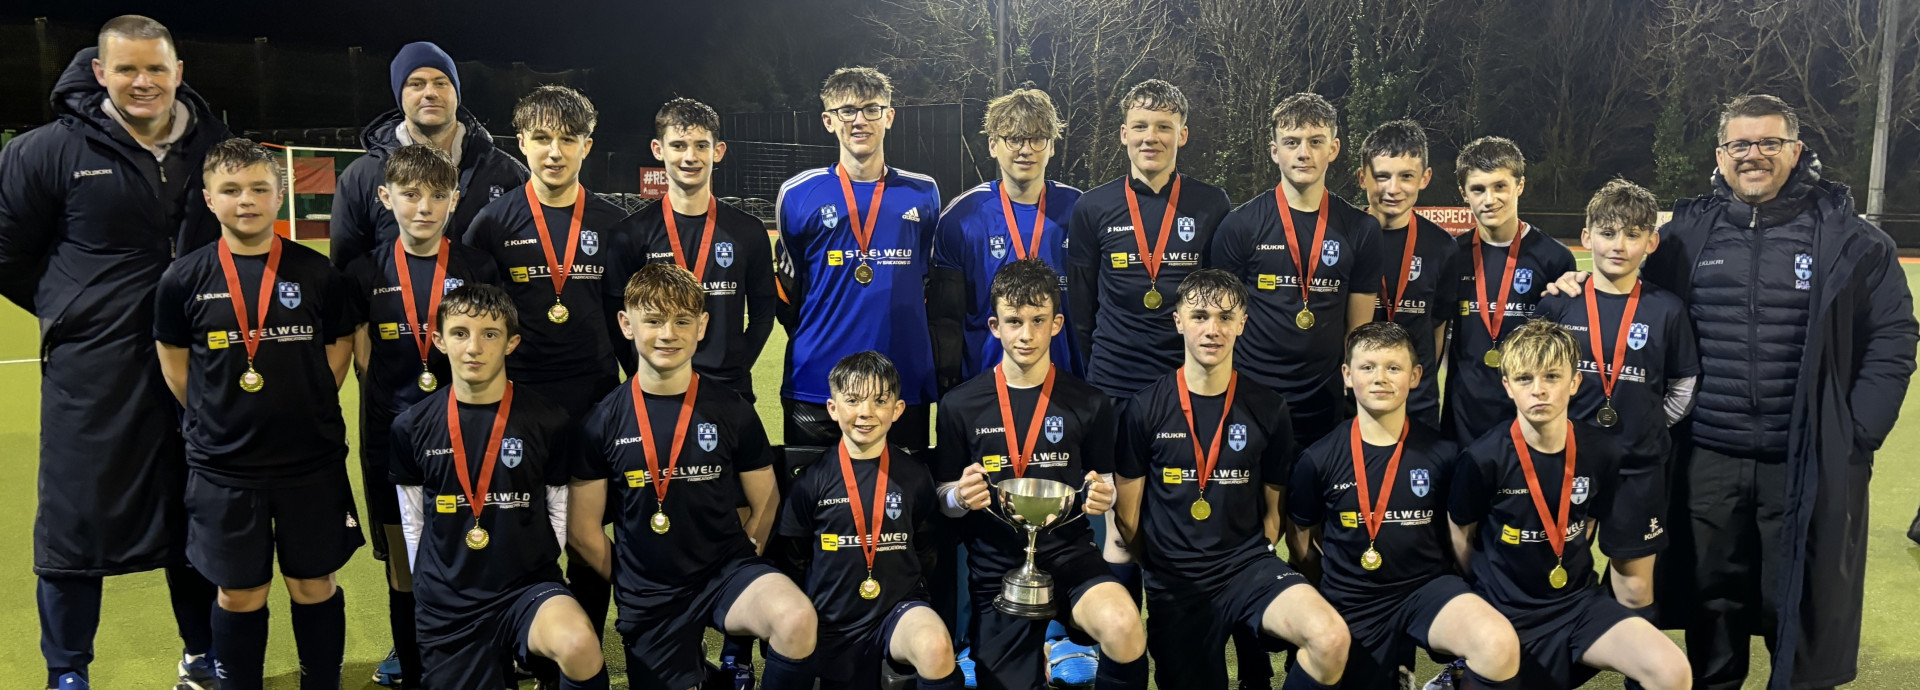 Further joy for Cookstown HS U14s